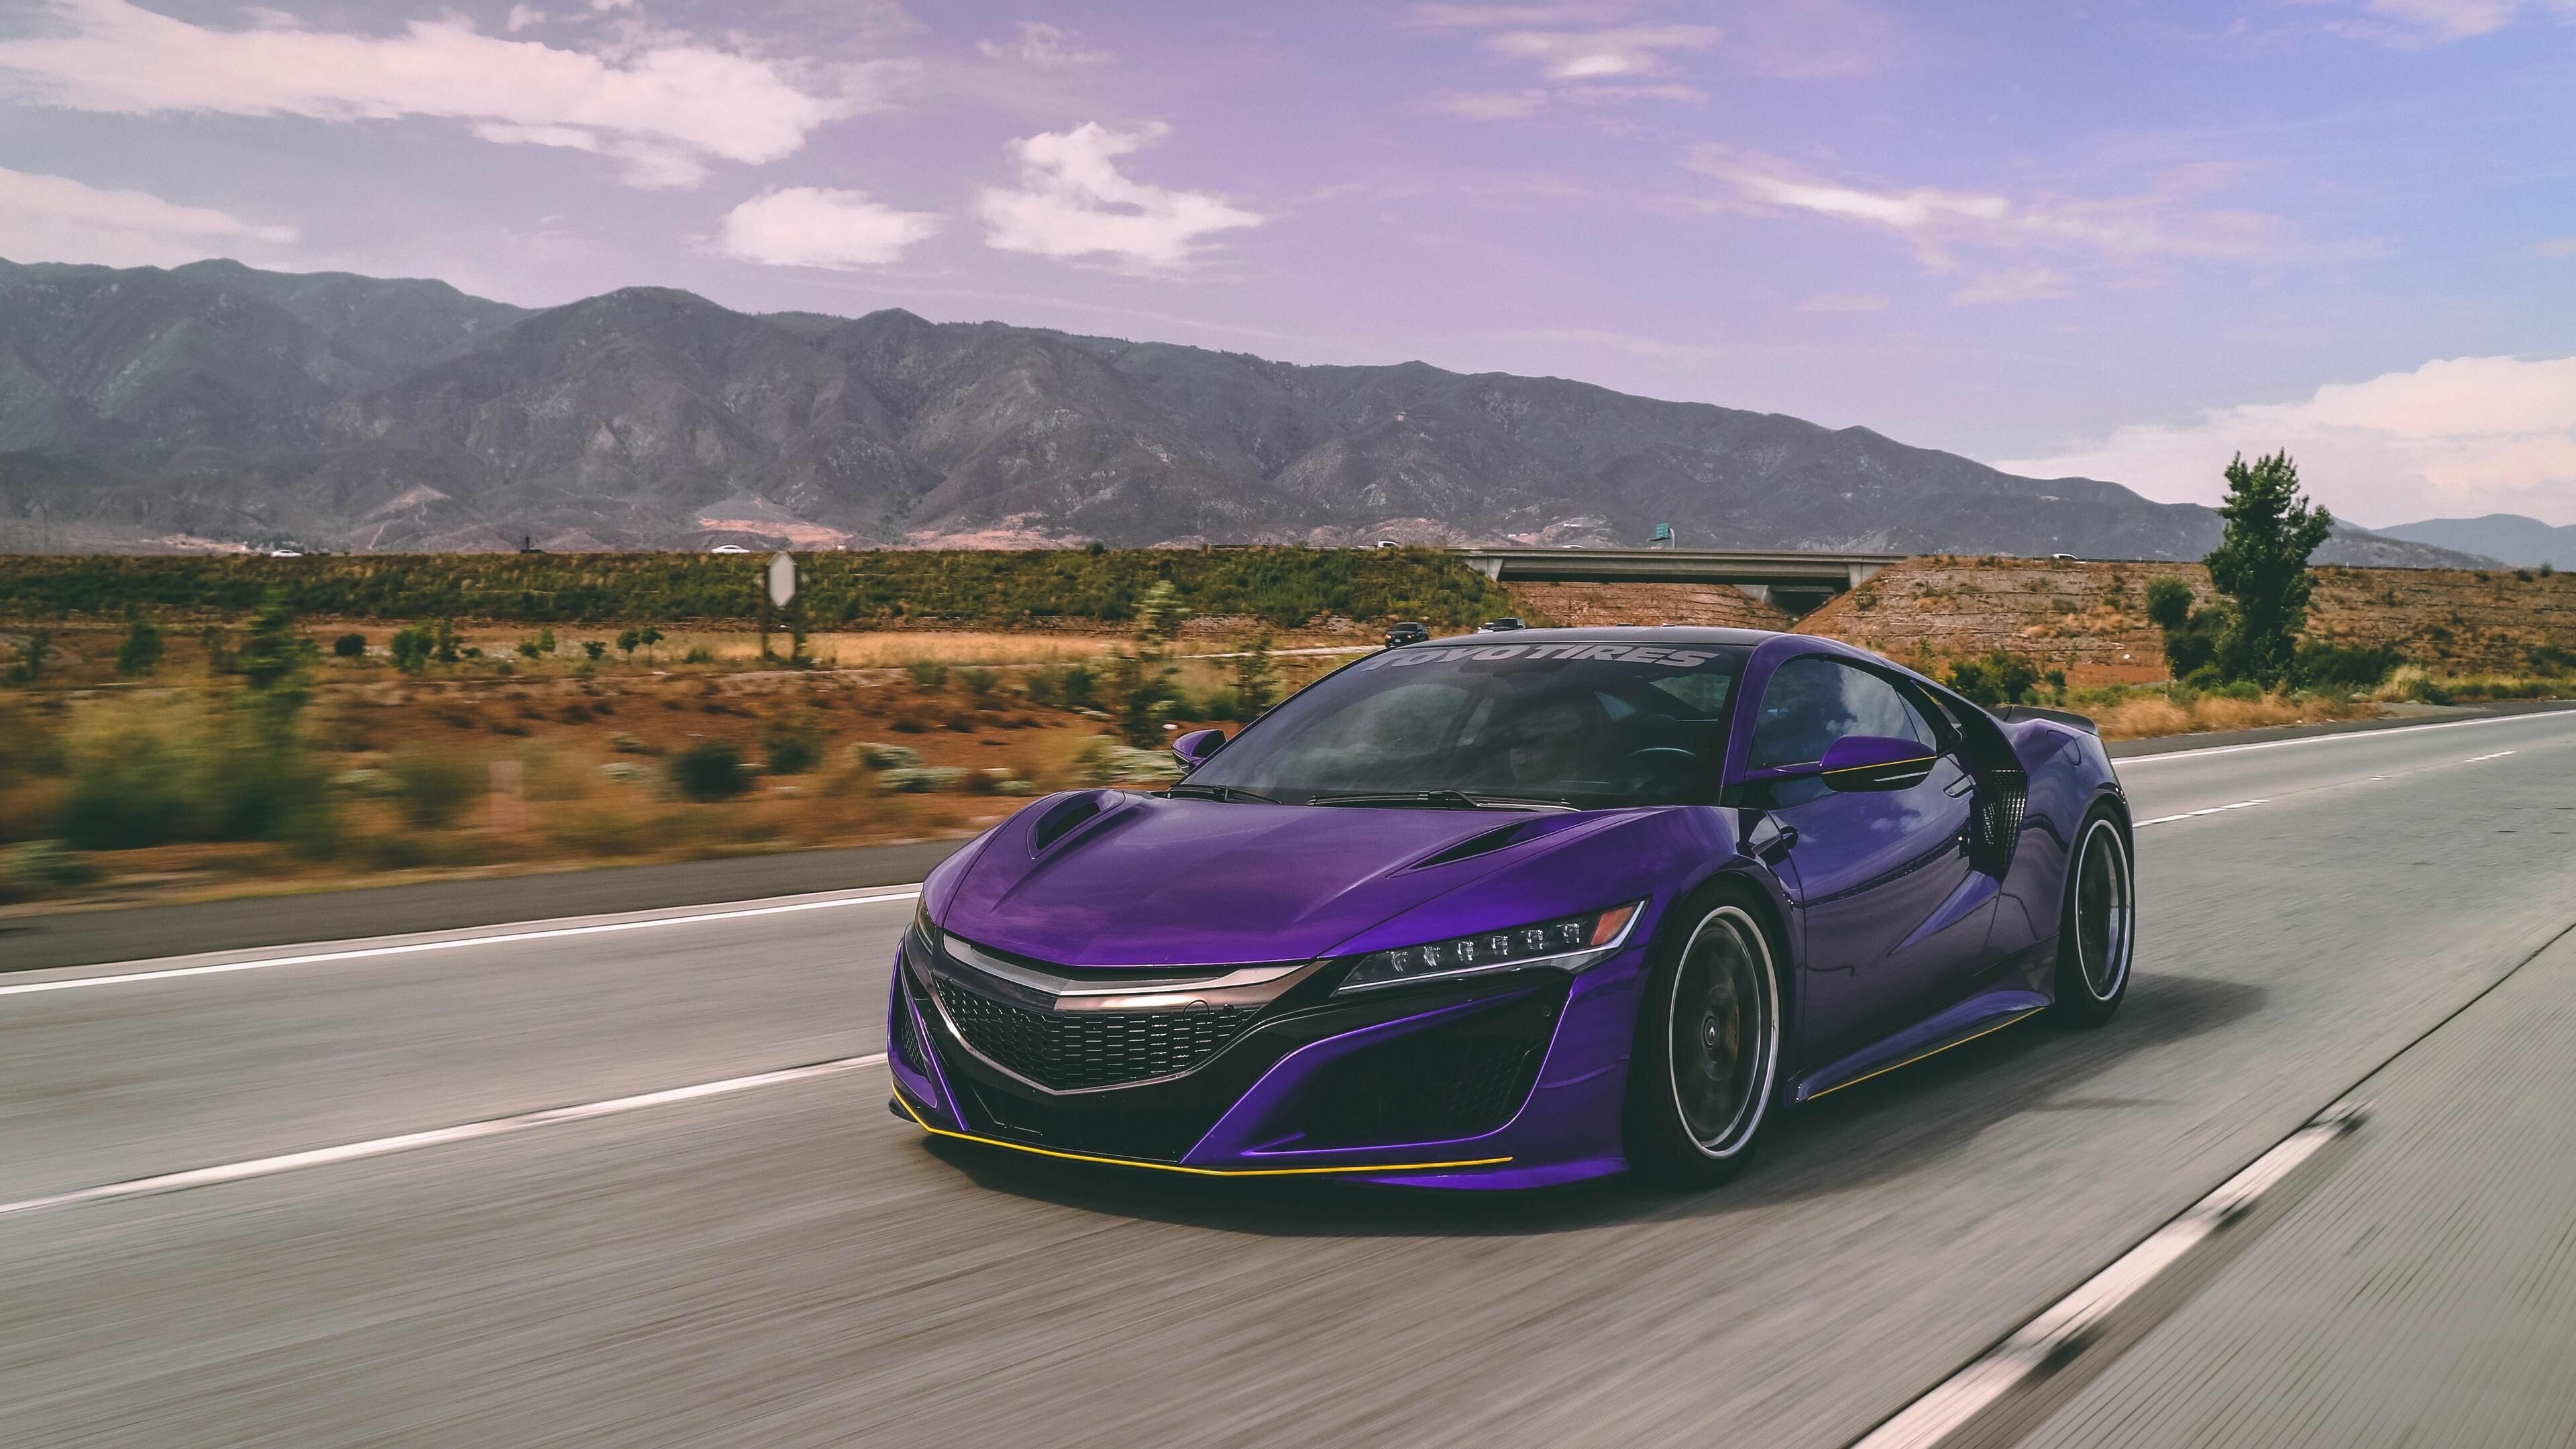 Acura: An upscale automaker known for offering cars with impressive levels of luxury, Supercar. 3840x2160 4K Background.